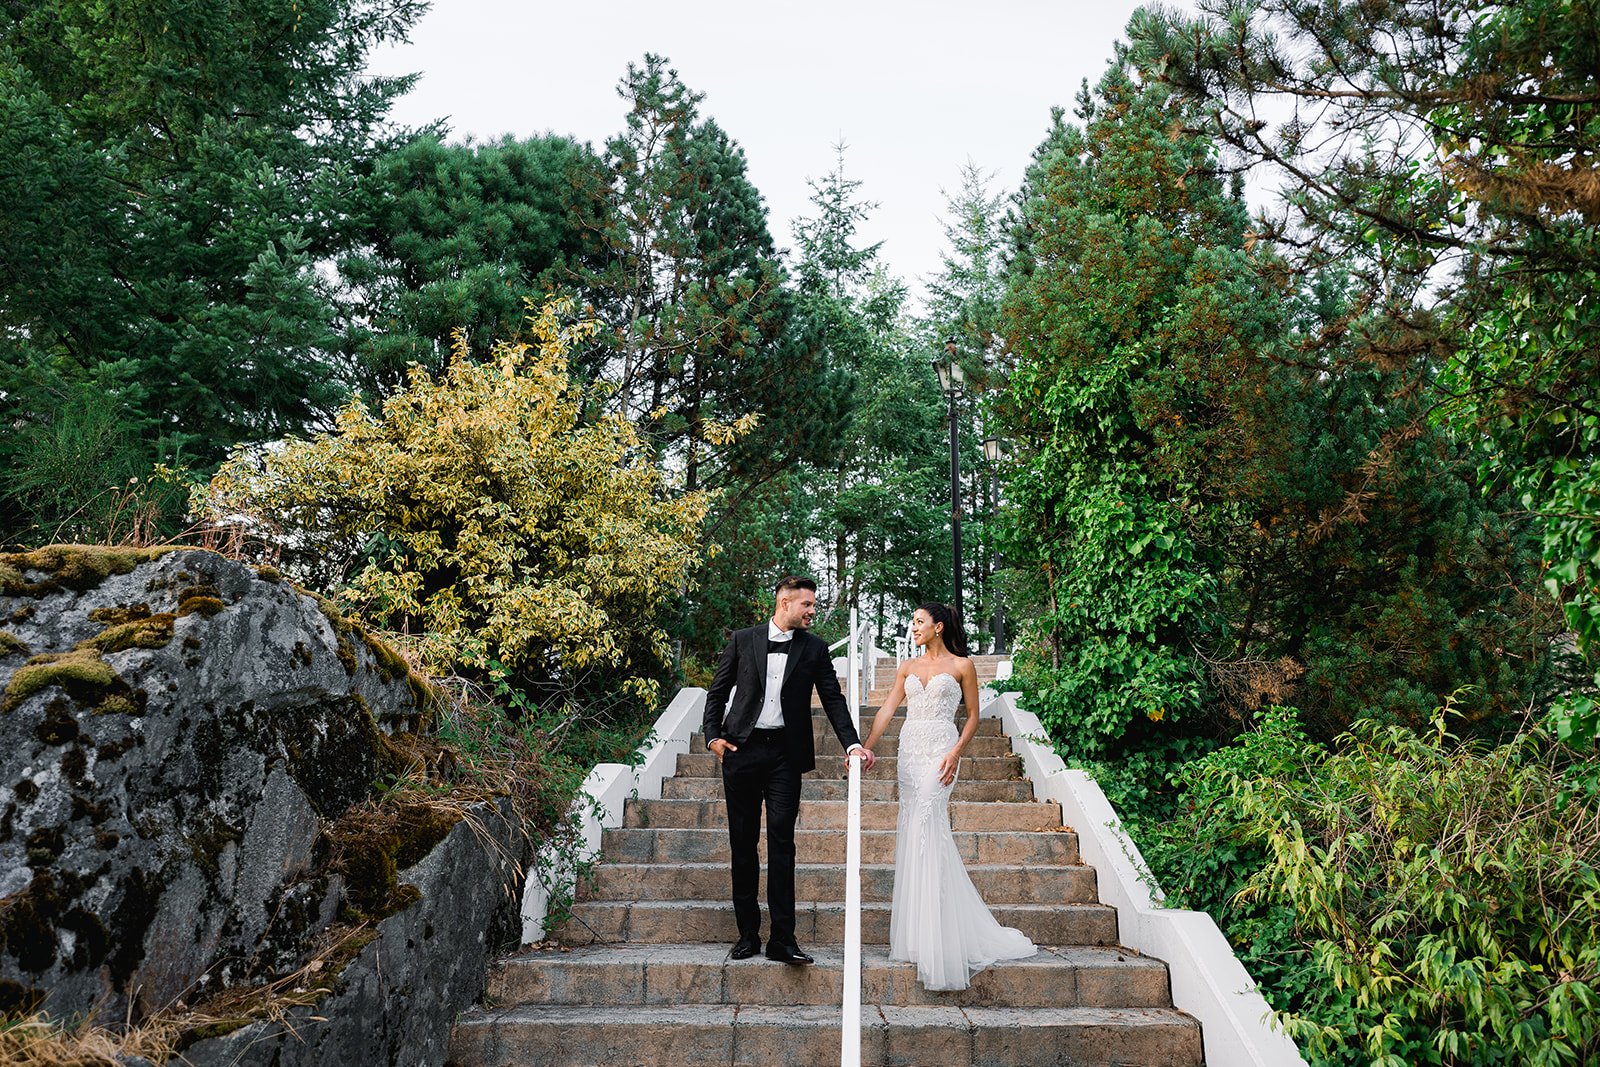 A bride and groom pose on an outdoor staircase surrounded by greenery.